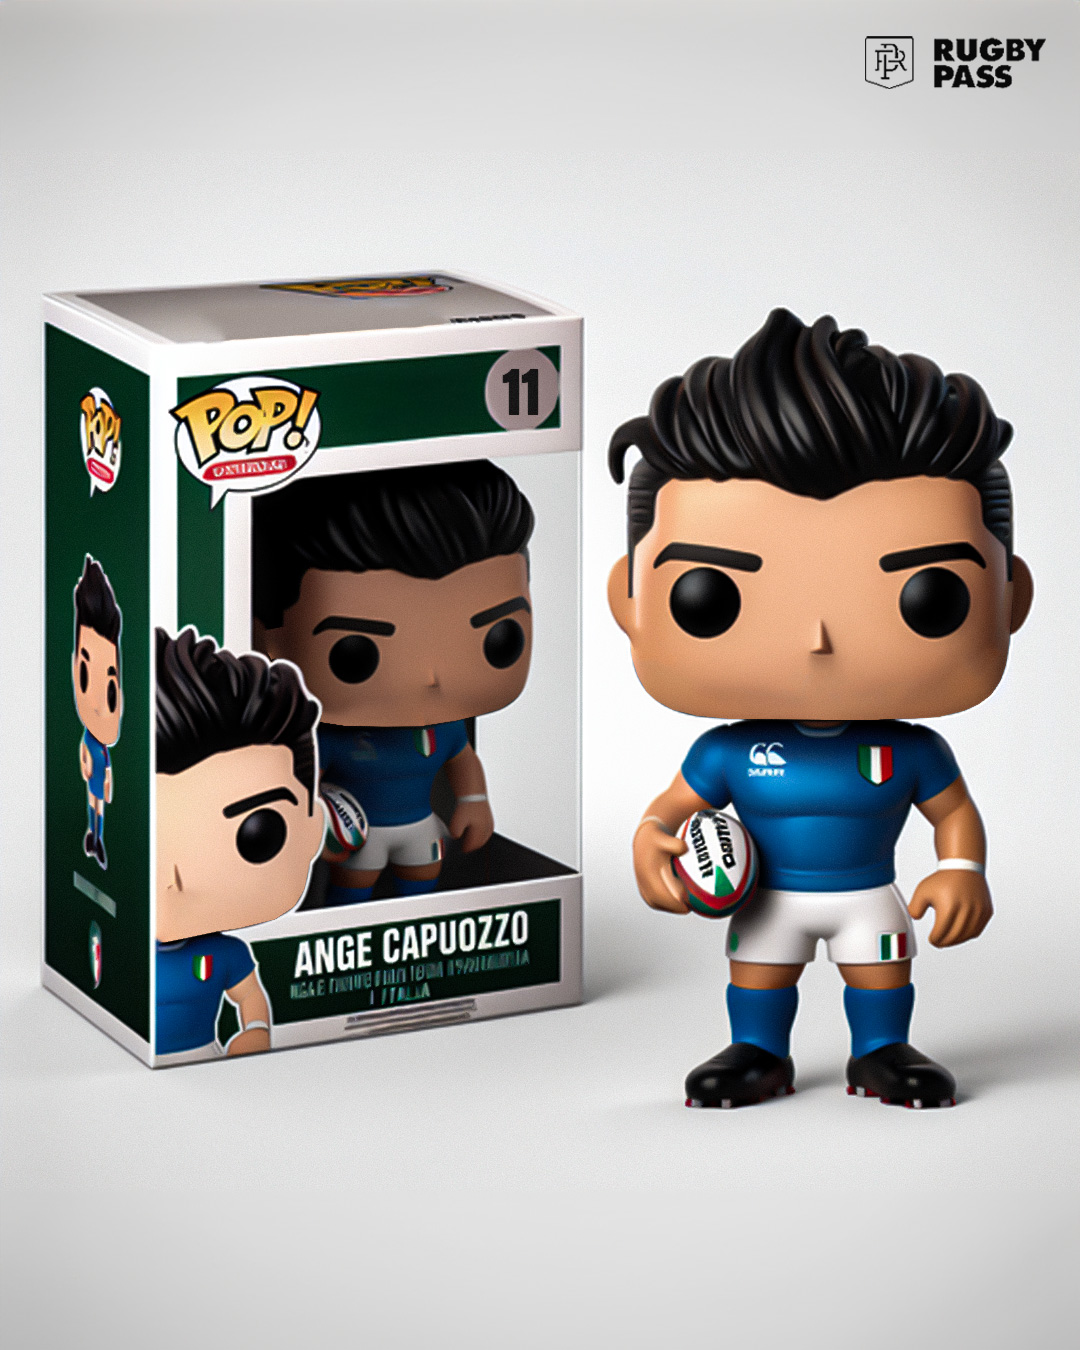 RugbyPass on X: Your favourite Six Nation stars as Funko Pops